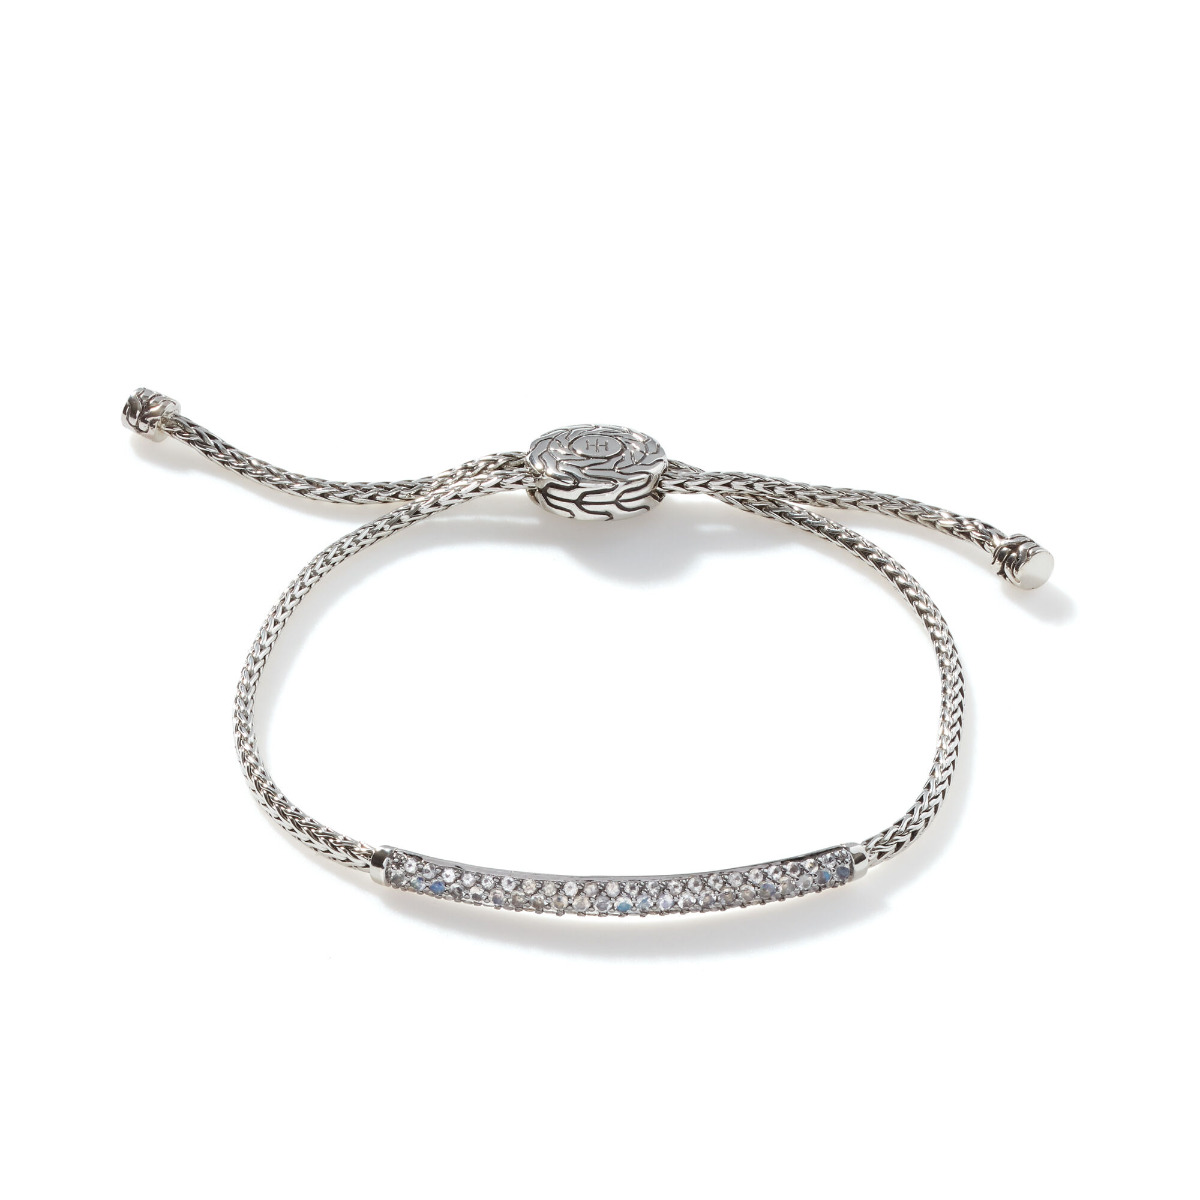 John Hardy "Classic Chain" sterling silver adjustable pull through station bracelet featuring a rainbow moonstone bar